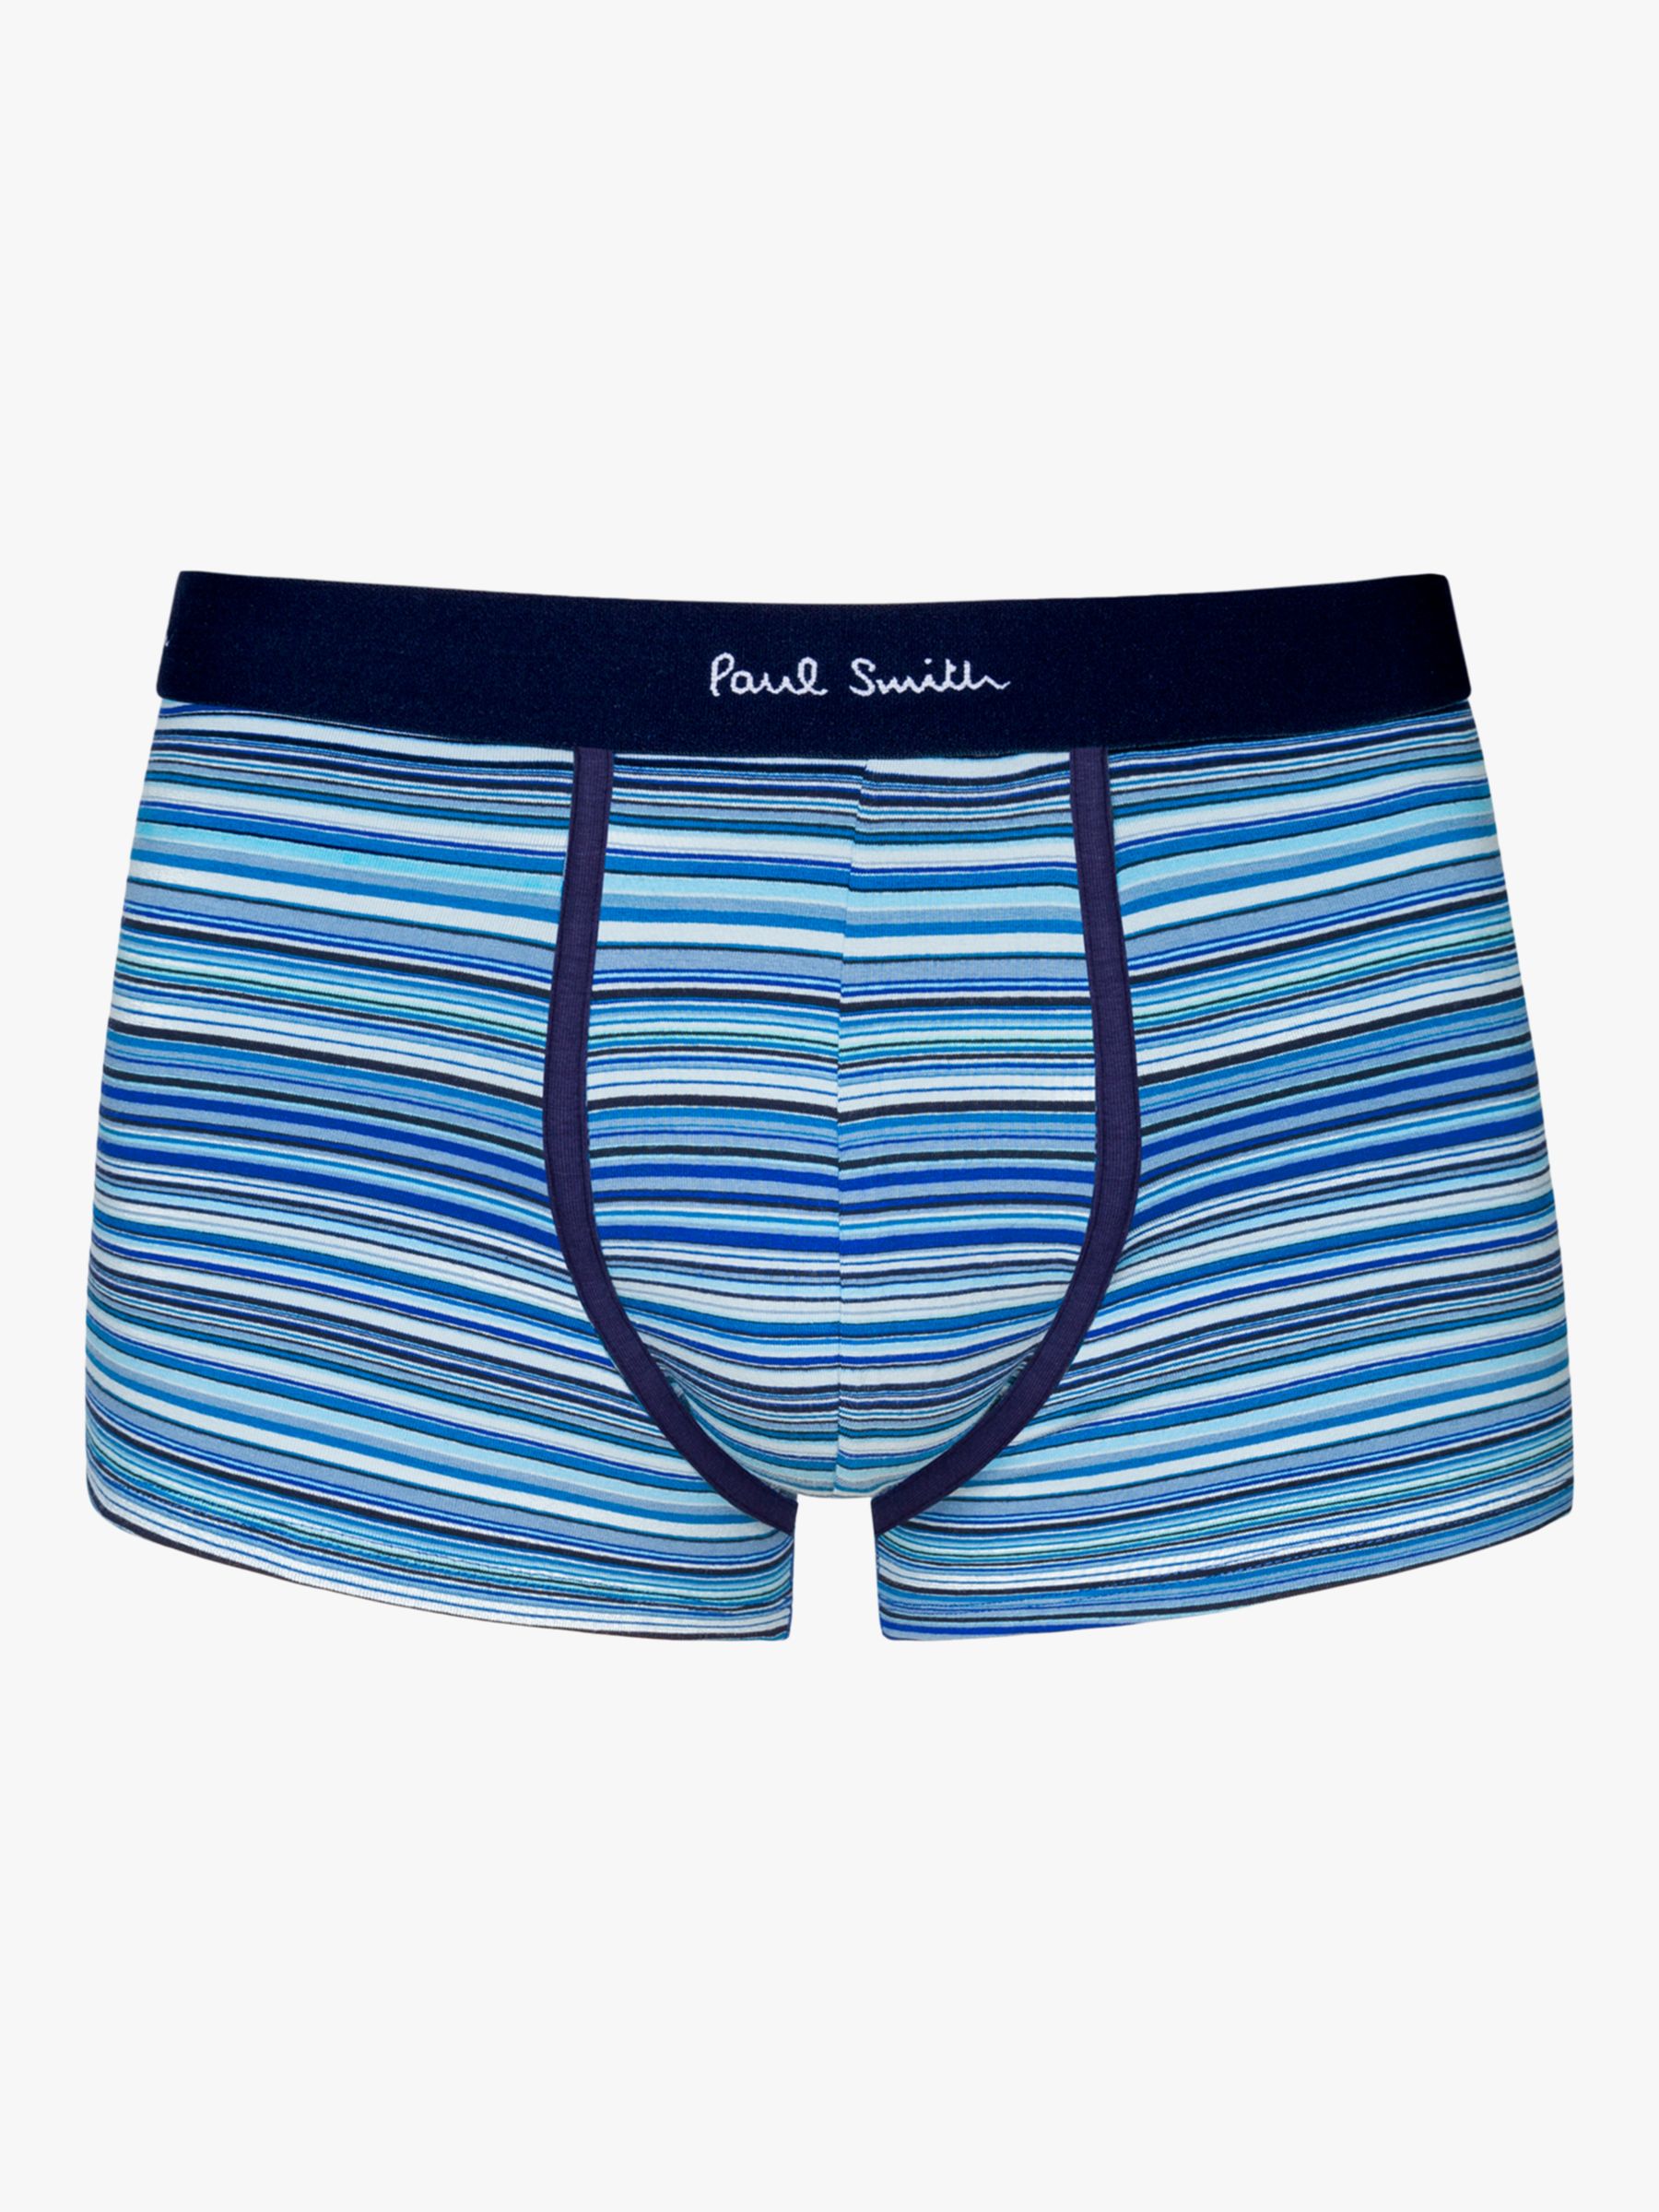 Paul Smith Stripe and Plain Trunks, Pack of 5, Multi, XL